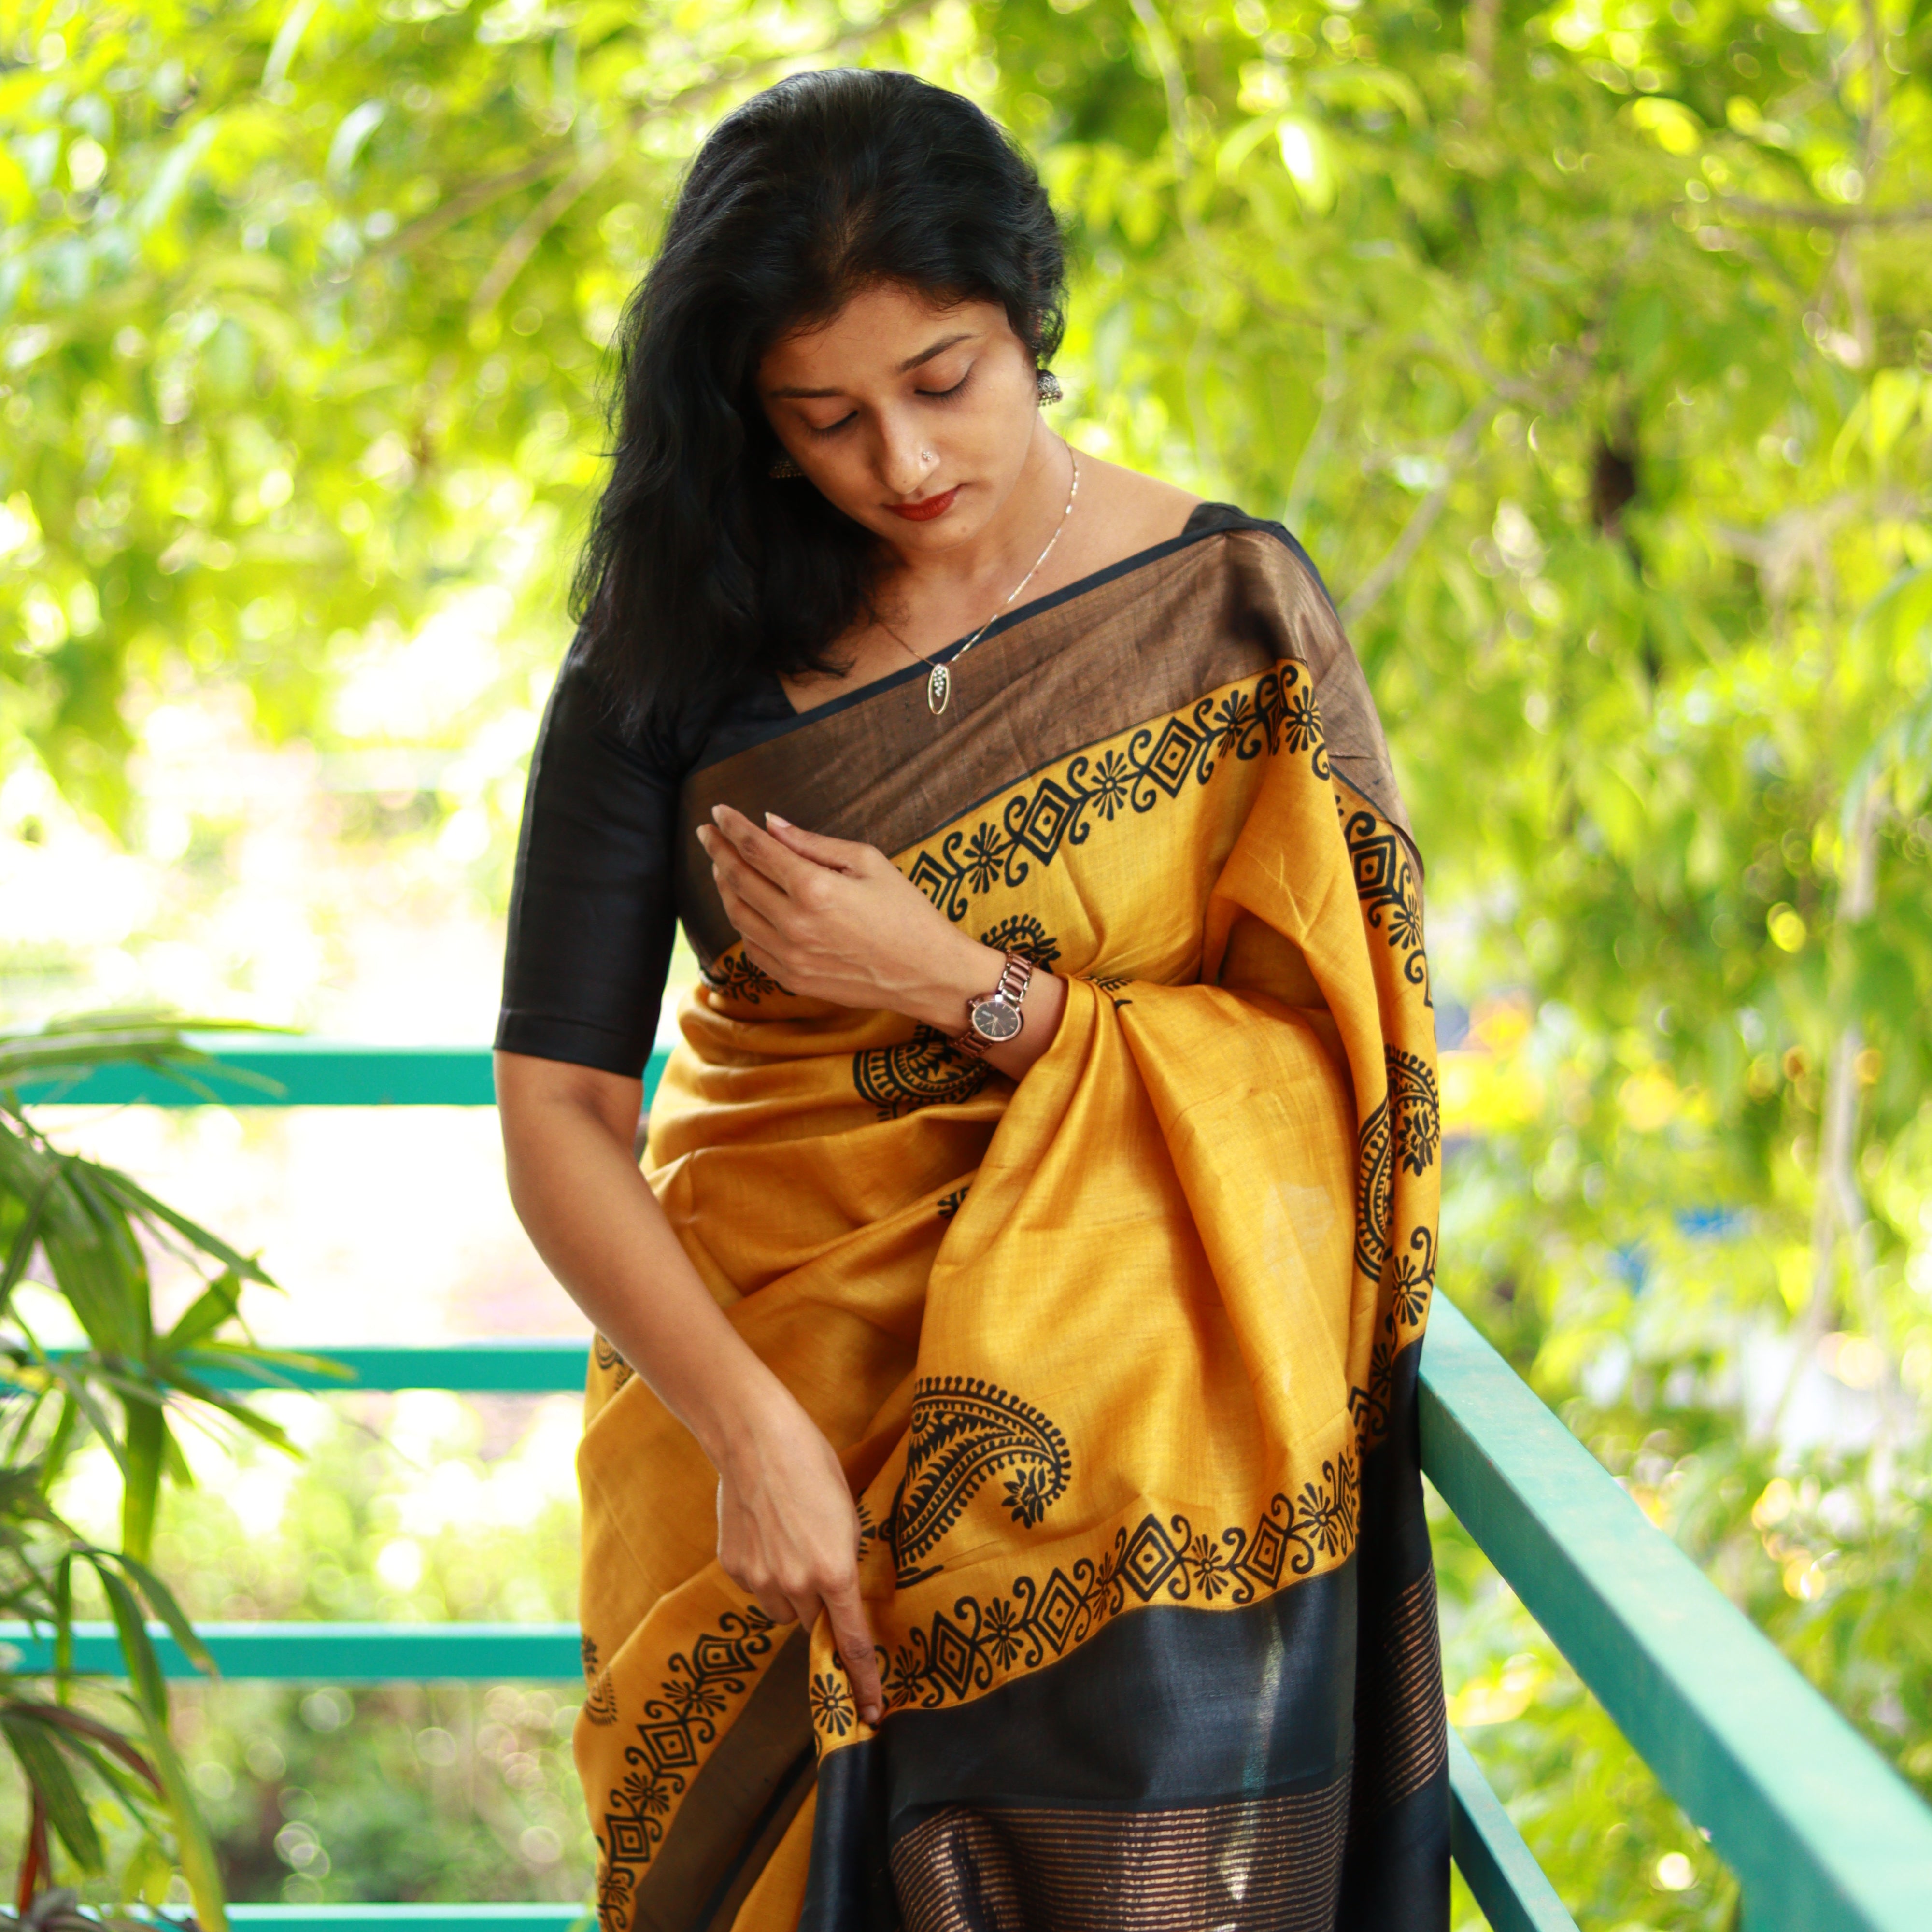 Load image into Gallery viewer, Jet Black Pure desi Tussar Saree- 3540: Pre-Booking
